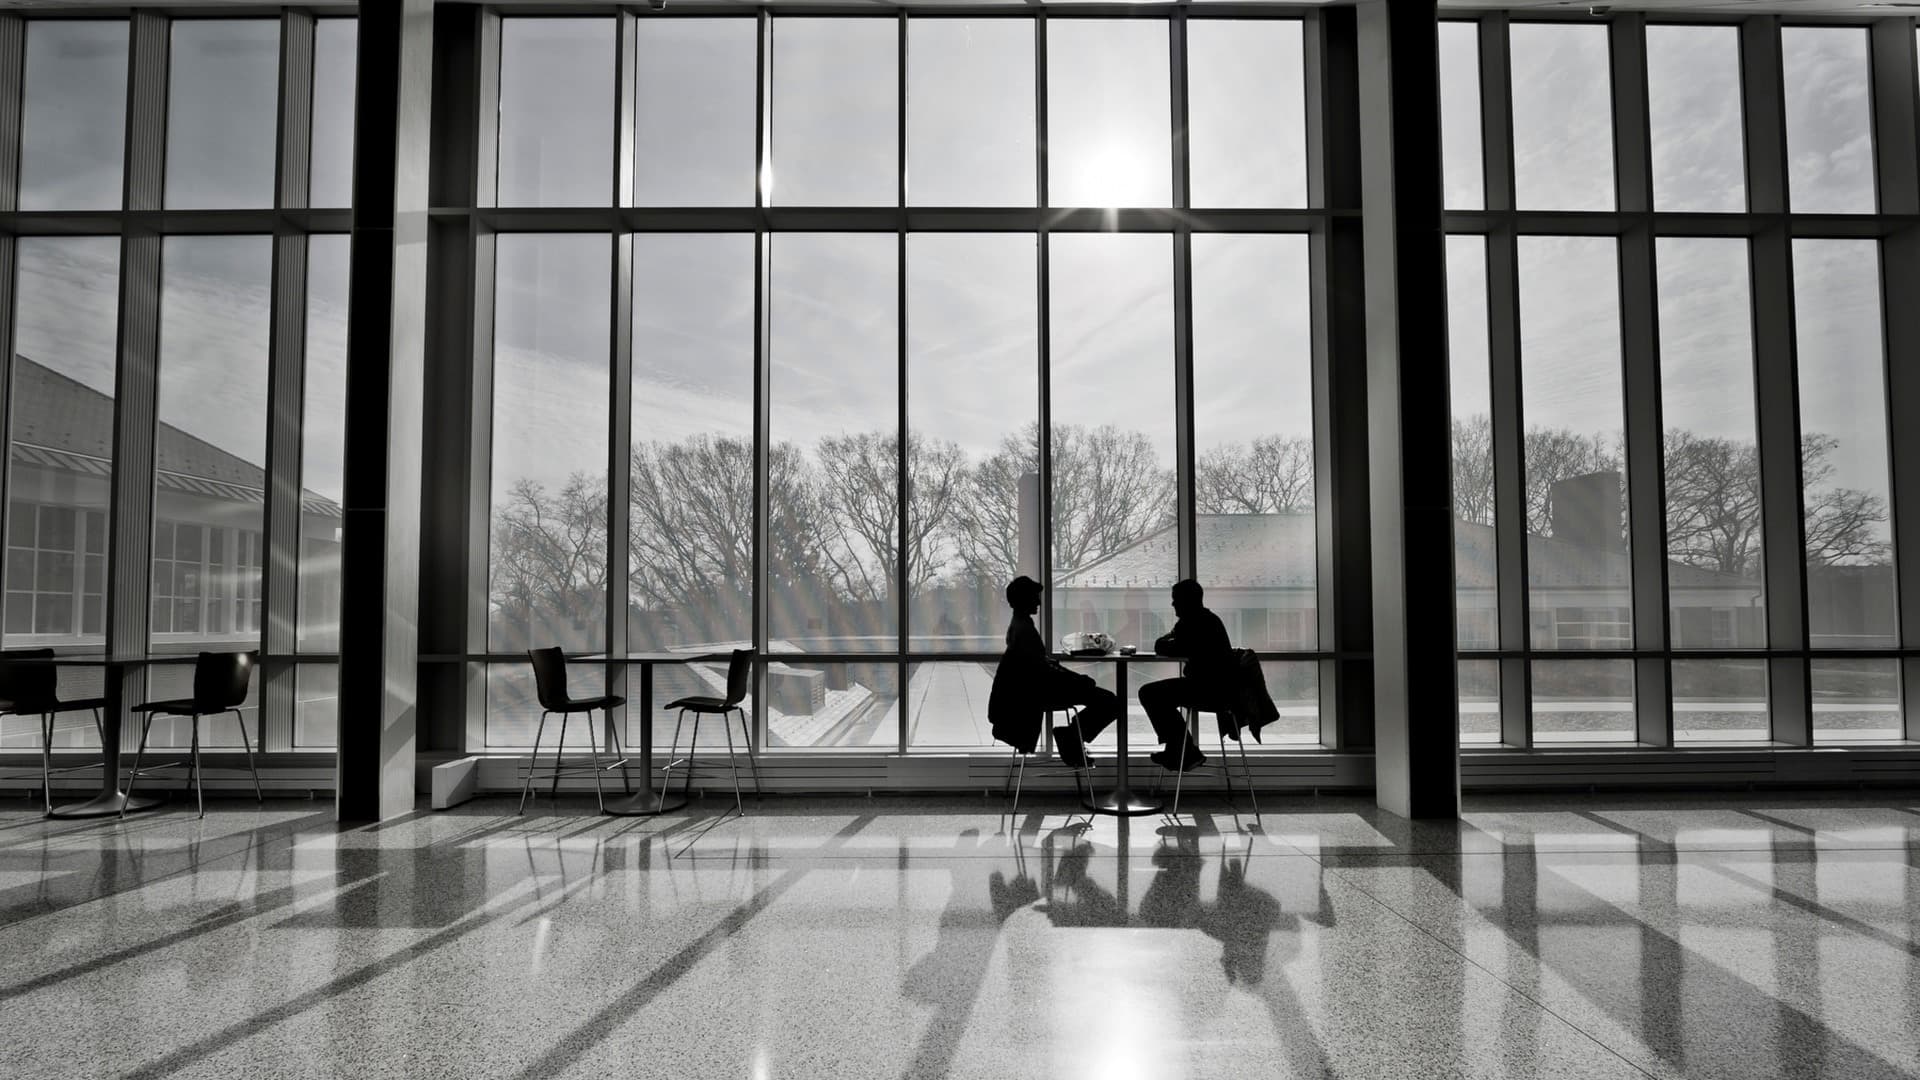 Gray Scale. Two individuals sit in deep discussion at a table, both silhouetted by a bright warm sun shining through floor to ceiling windows.